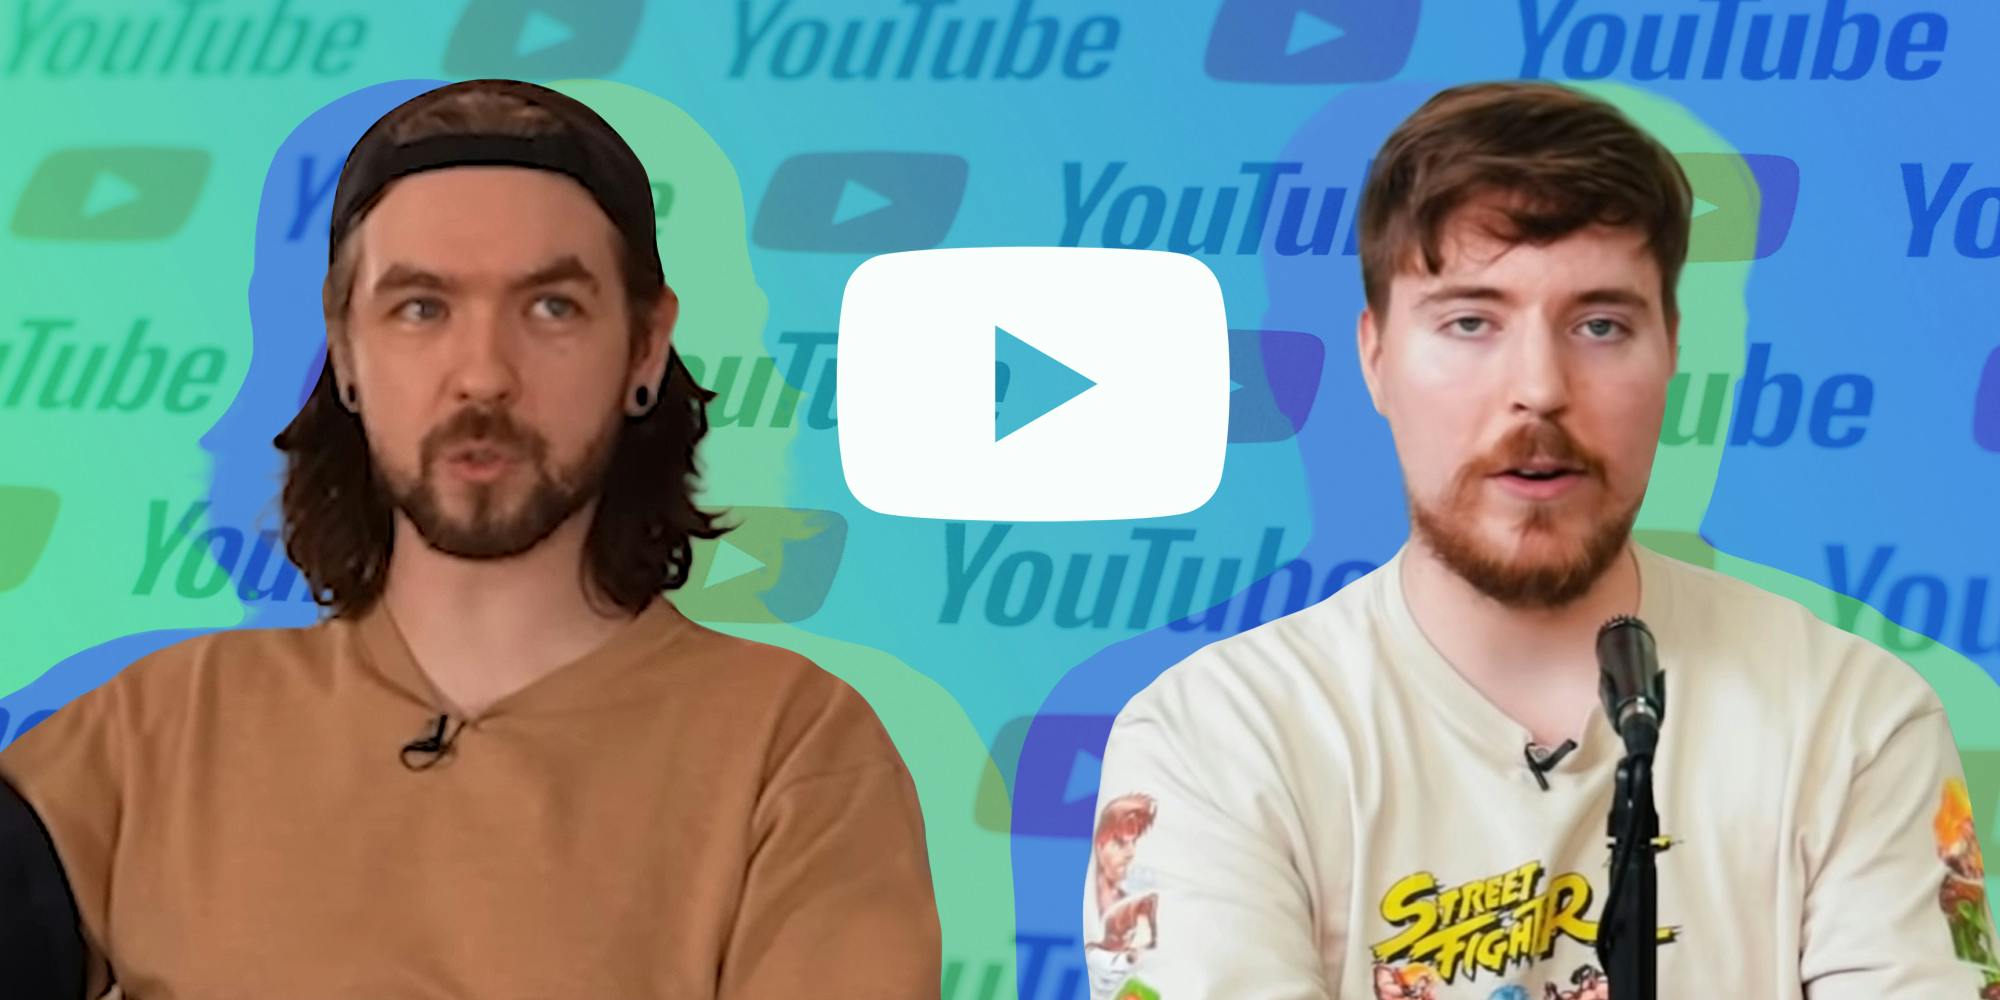 An Online Squabble Asks: Did MrBeast and His Copycats ‘Ruin’ YouTube’s Culture?